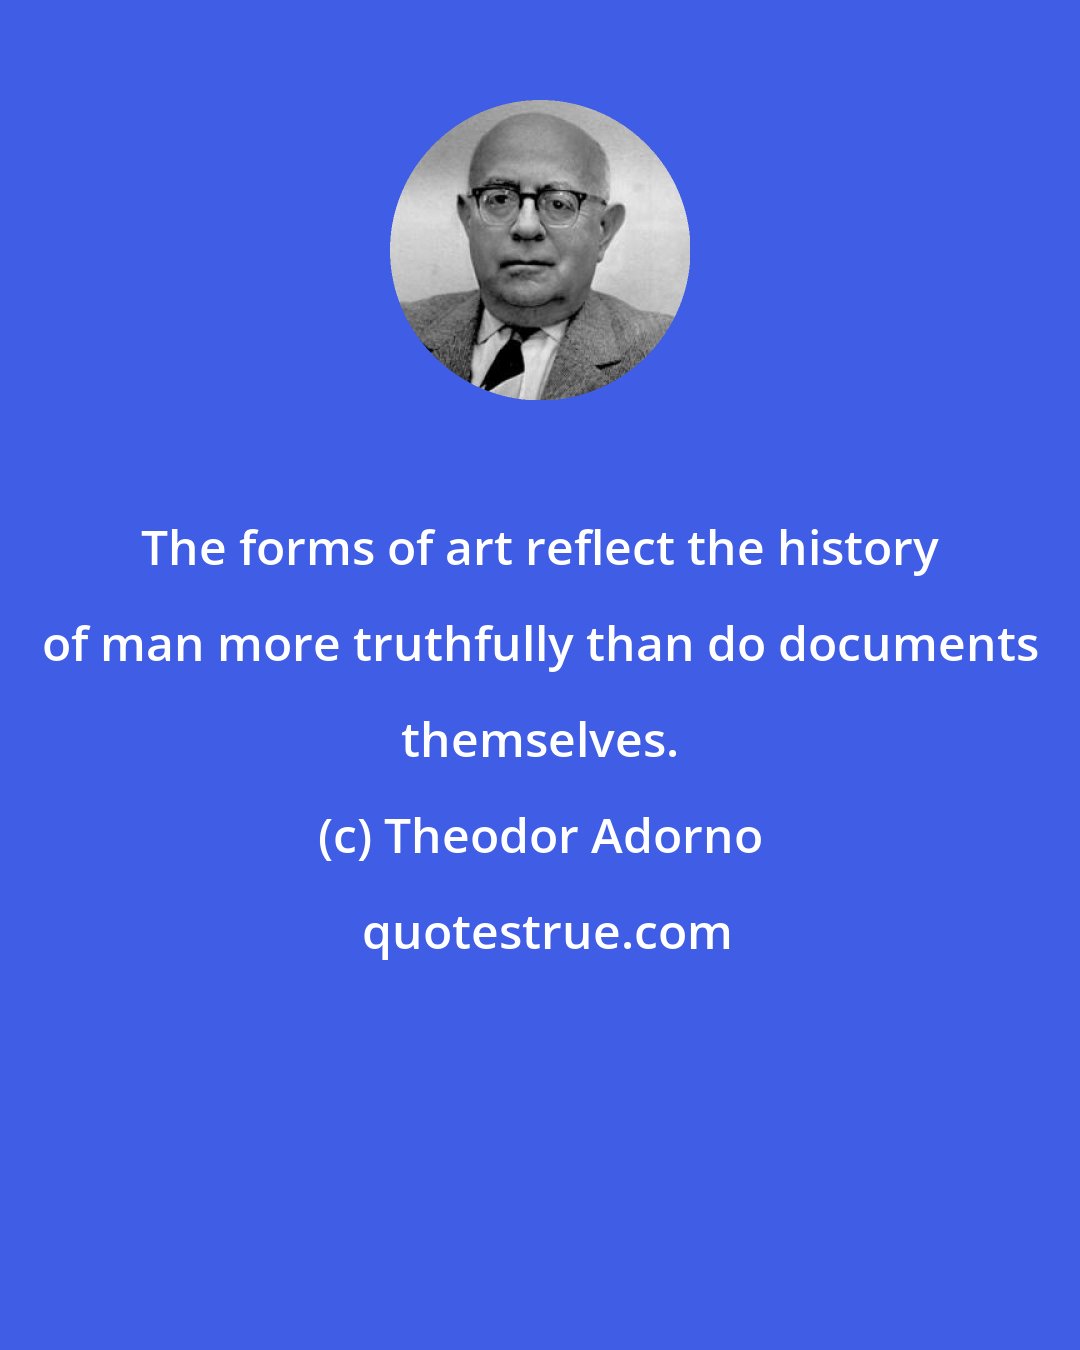 Theodor Adorno: The forms of art reflect the history of man more truthfully than do documents themselves.